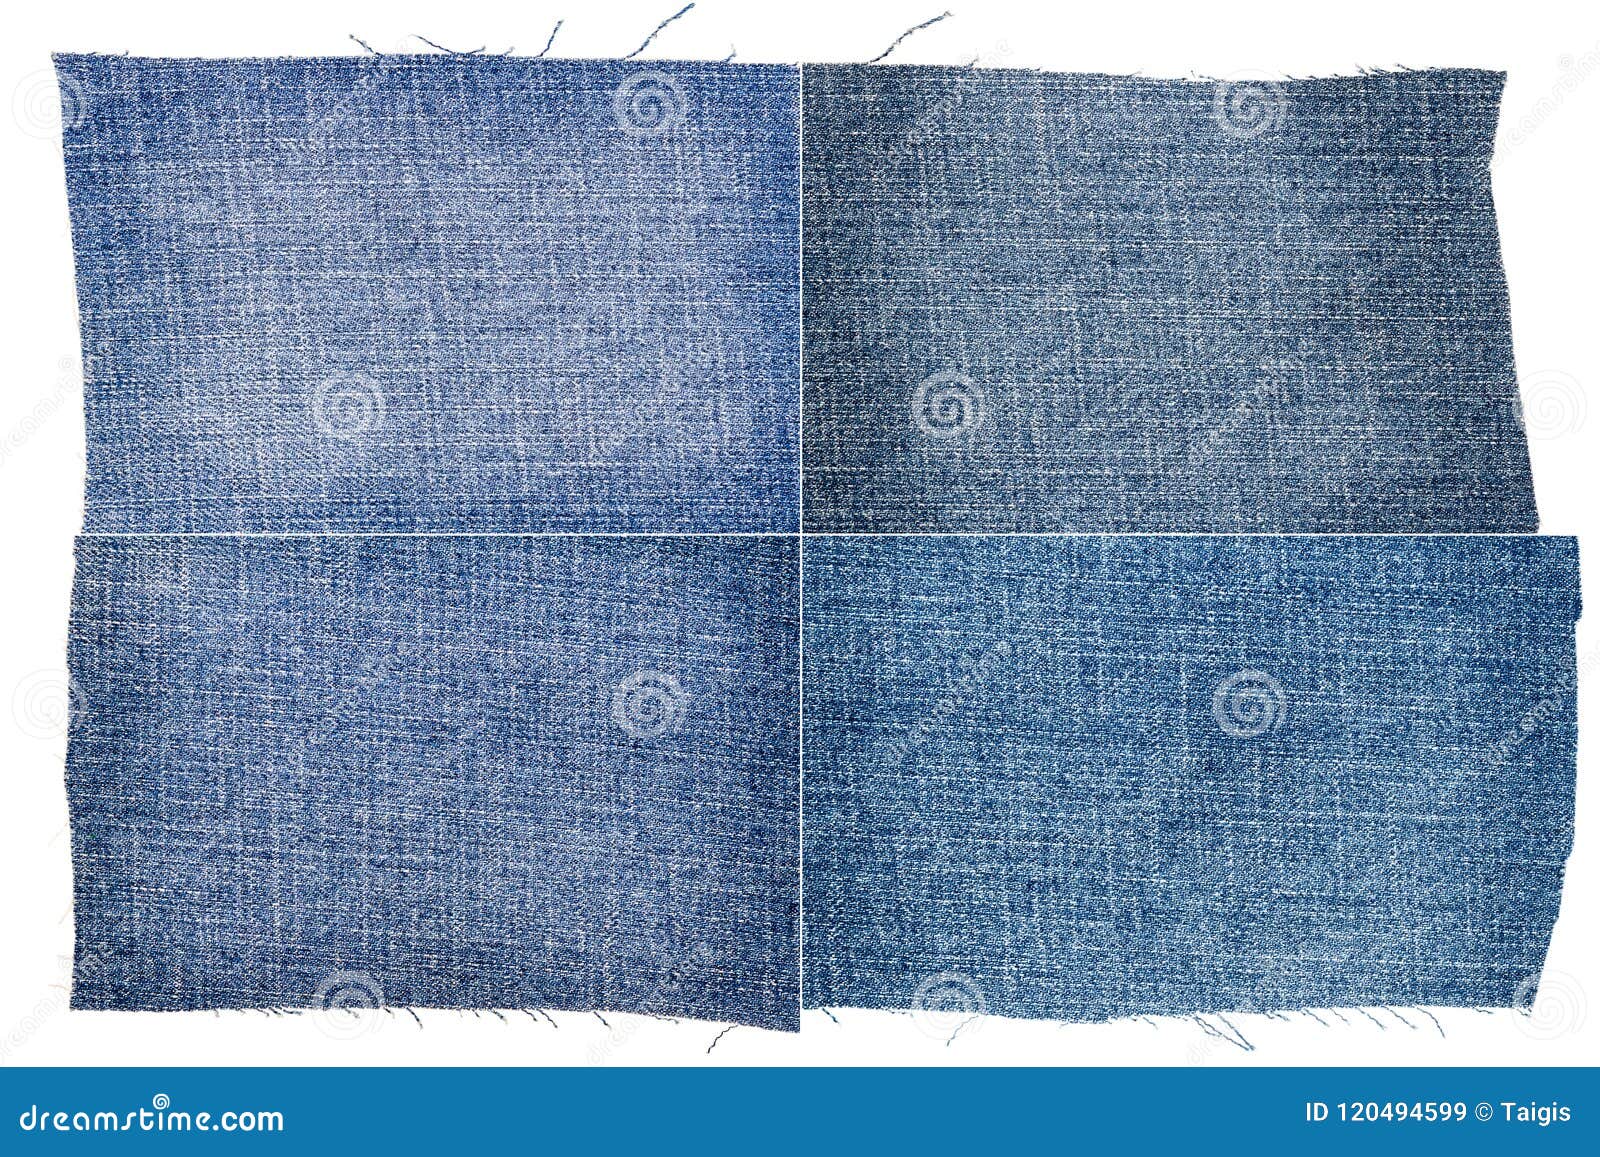 Collection of Light Blue Jeans Fabric Textures Stock Image - Image of ...